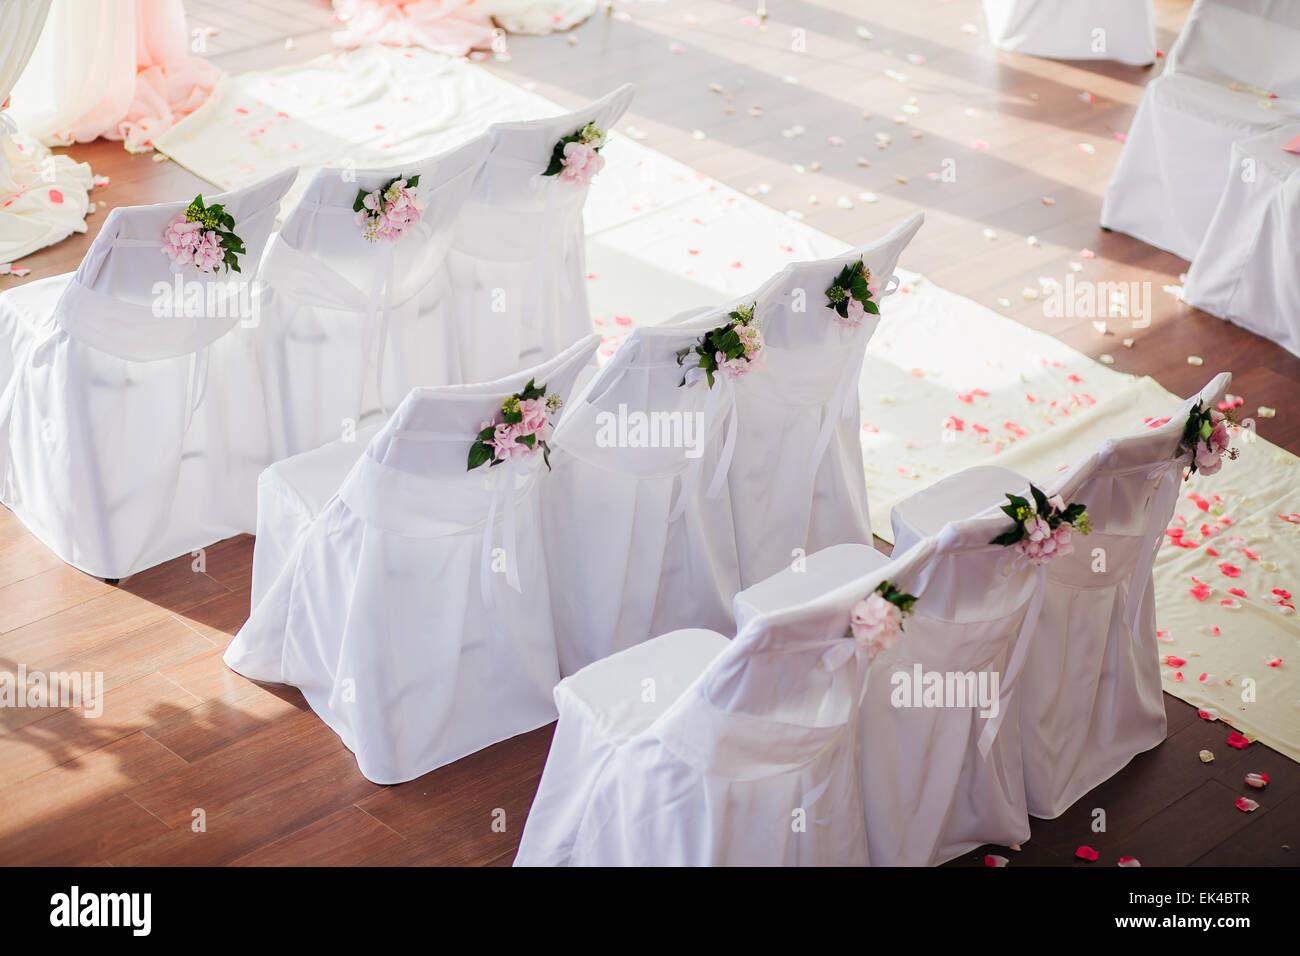 wedding chair covers with pink flowers Stock Photo